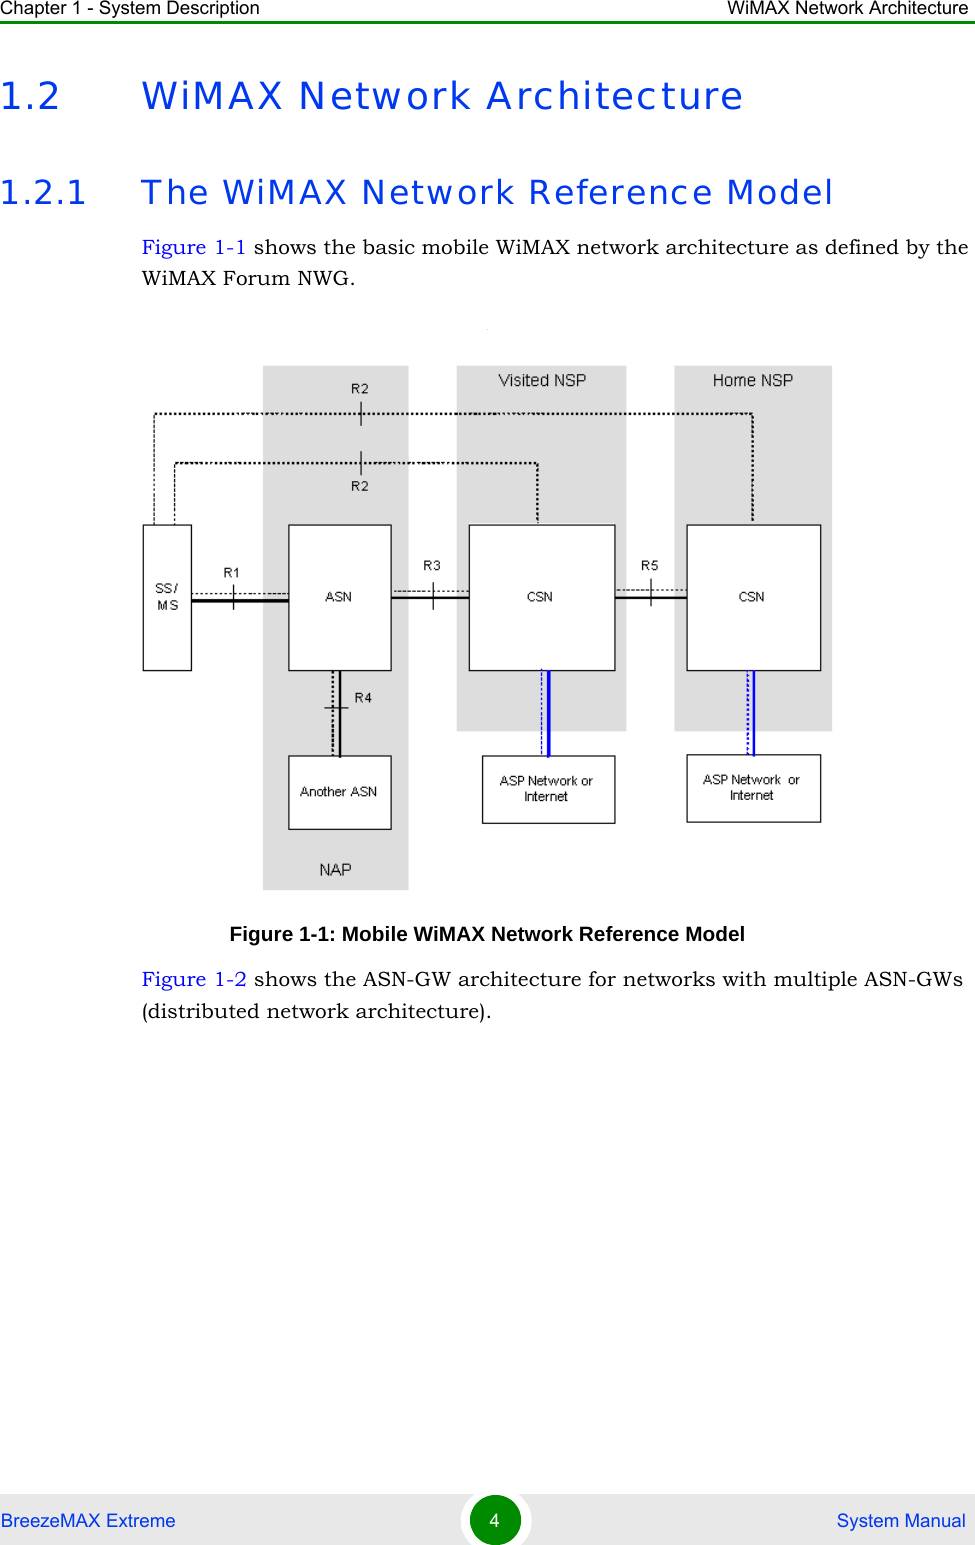 Chapter 1 - System Description WiMAX Network ArchitectureBreezeMAX Extreme 4 System Manual1.2 WiMAX Network Architecture1.2.1 The WiMAX Network Reference ModelFigure 1-1 shows the basic mobile WiMAX network architecture as defined by the WiMAX Forum NWG..Figure 1-2 shows the ASN-GW architecture for networks with multiple ASN-GWs (distributed network architecture).Figure 1-1: Mobile WiMAX Network Reference Model